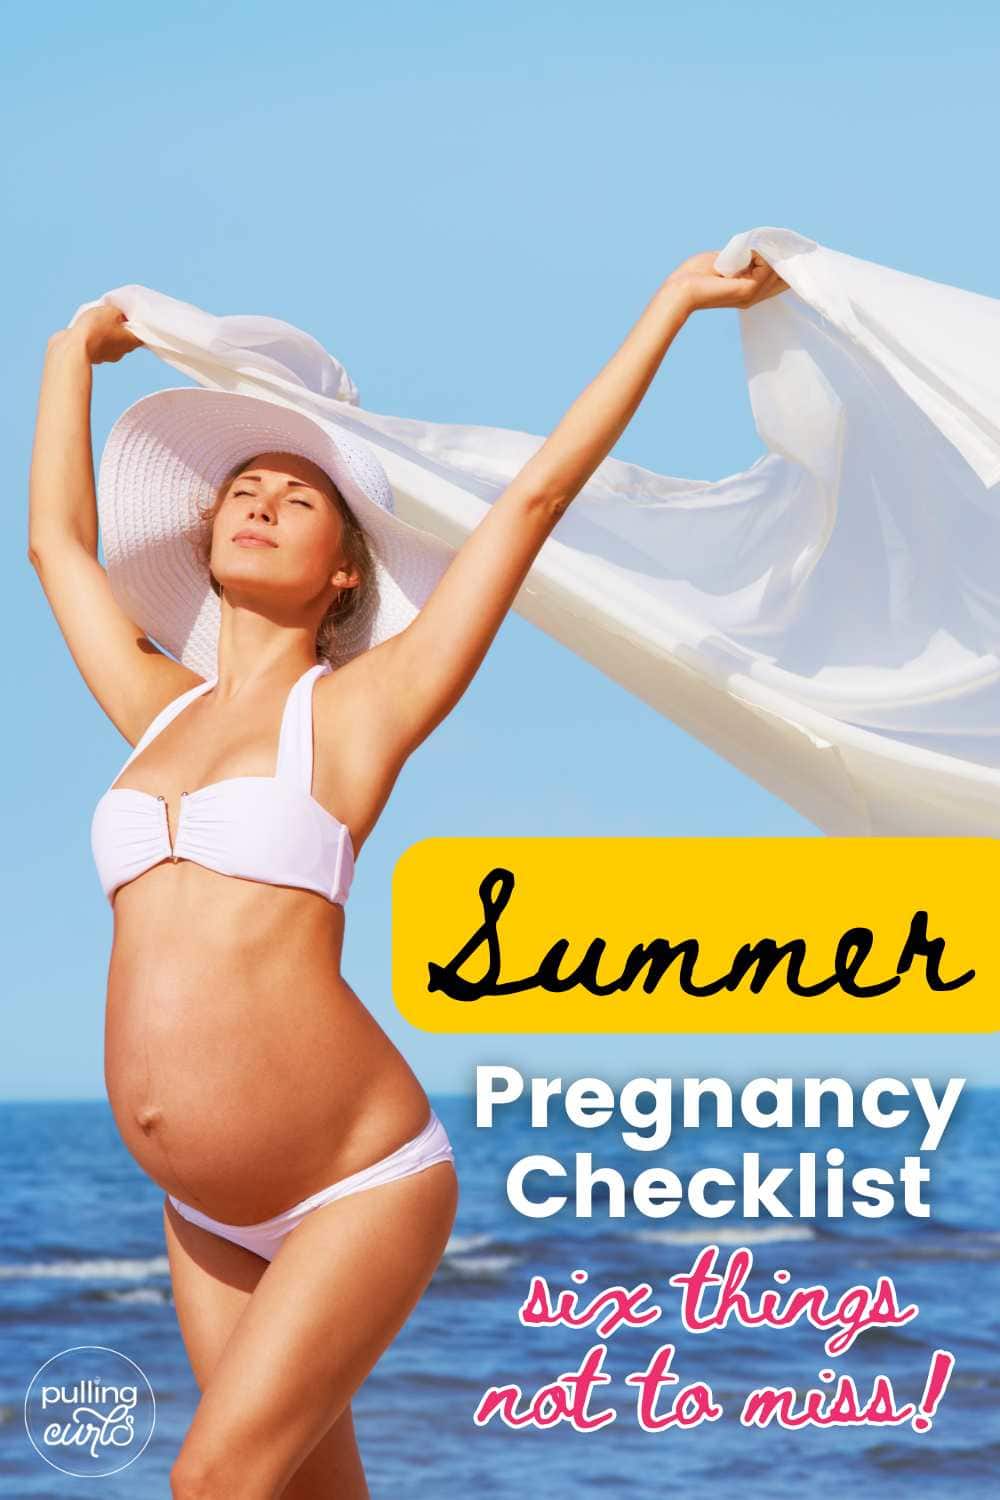 pregnant woman with a sheet in the wind // summer pregnancy checklist - 6 things not to miss! via @pullingcurls